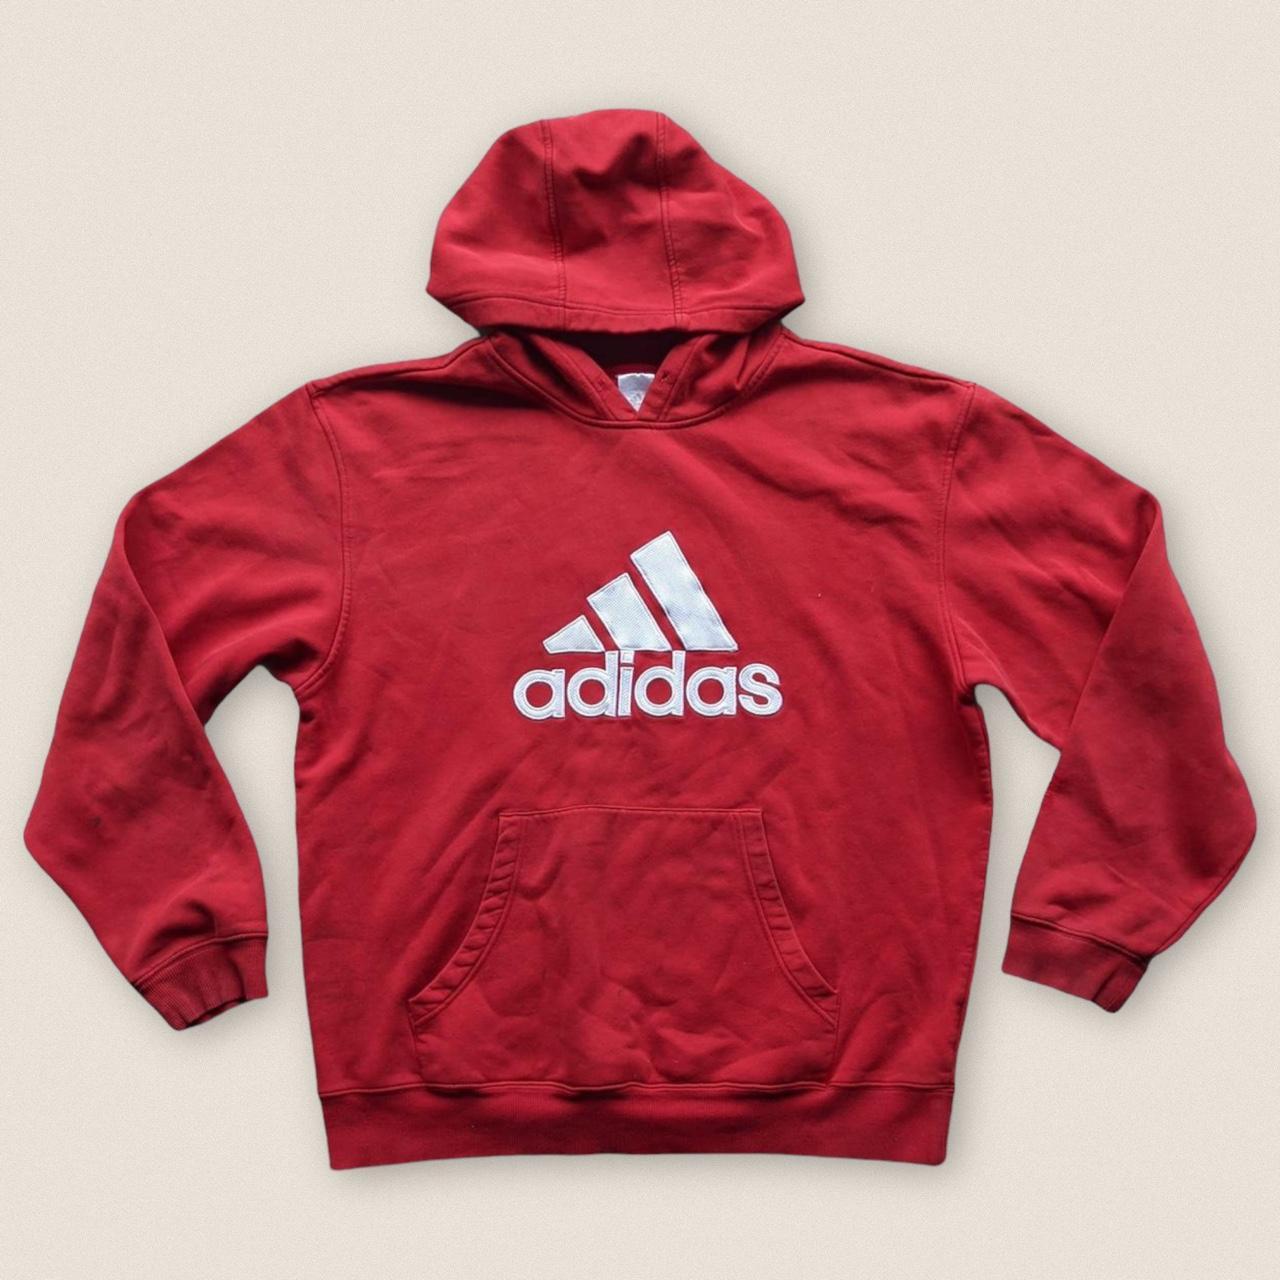 Adidas Men's Red and White Hoodie | Depop